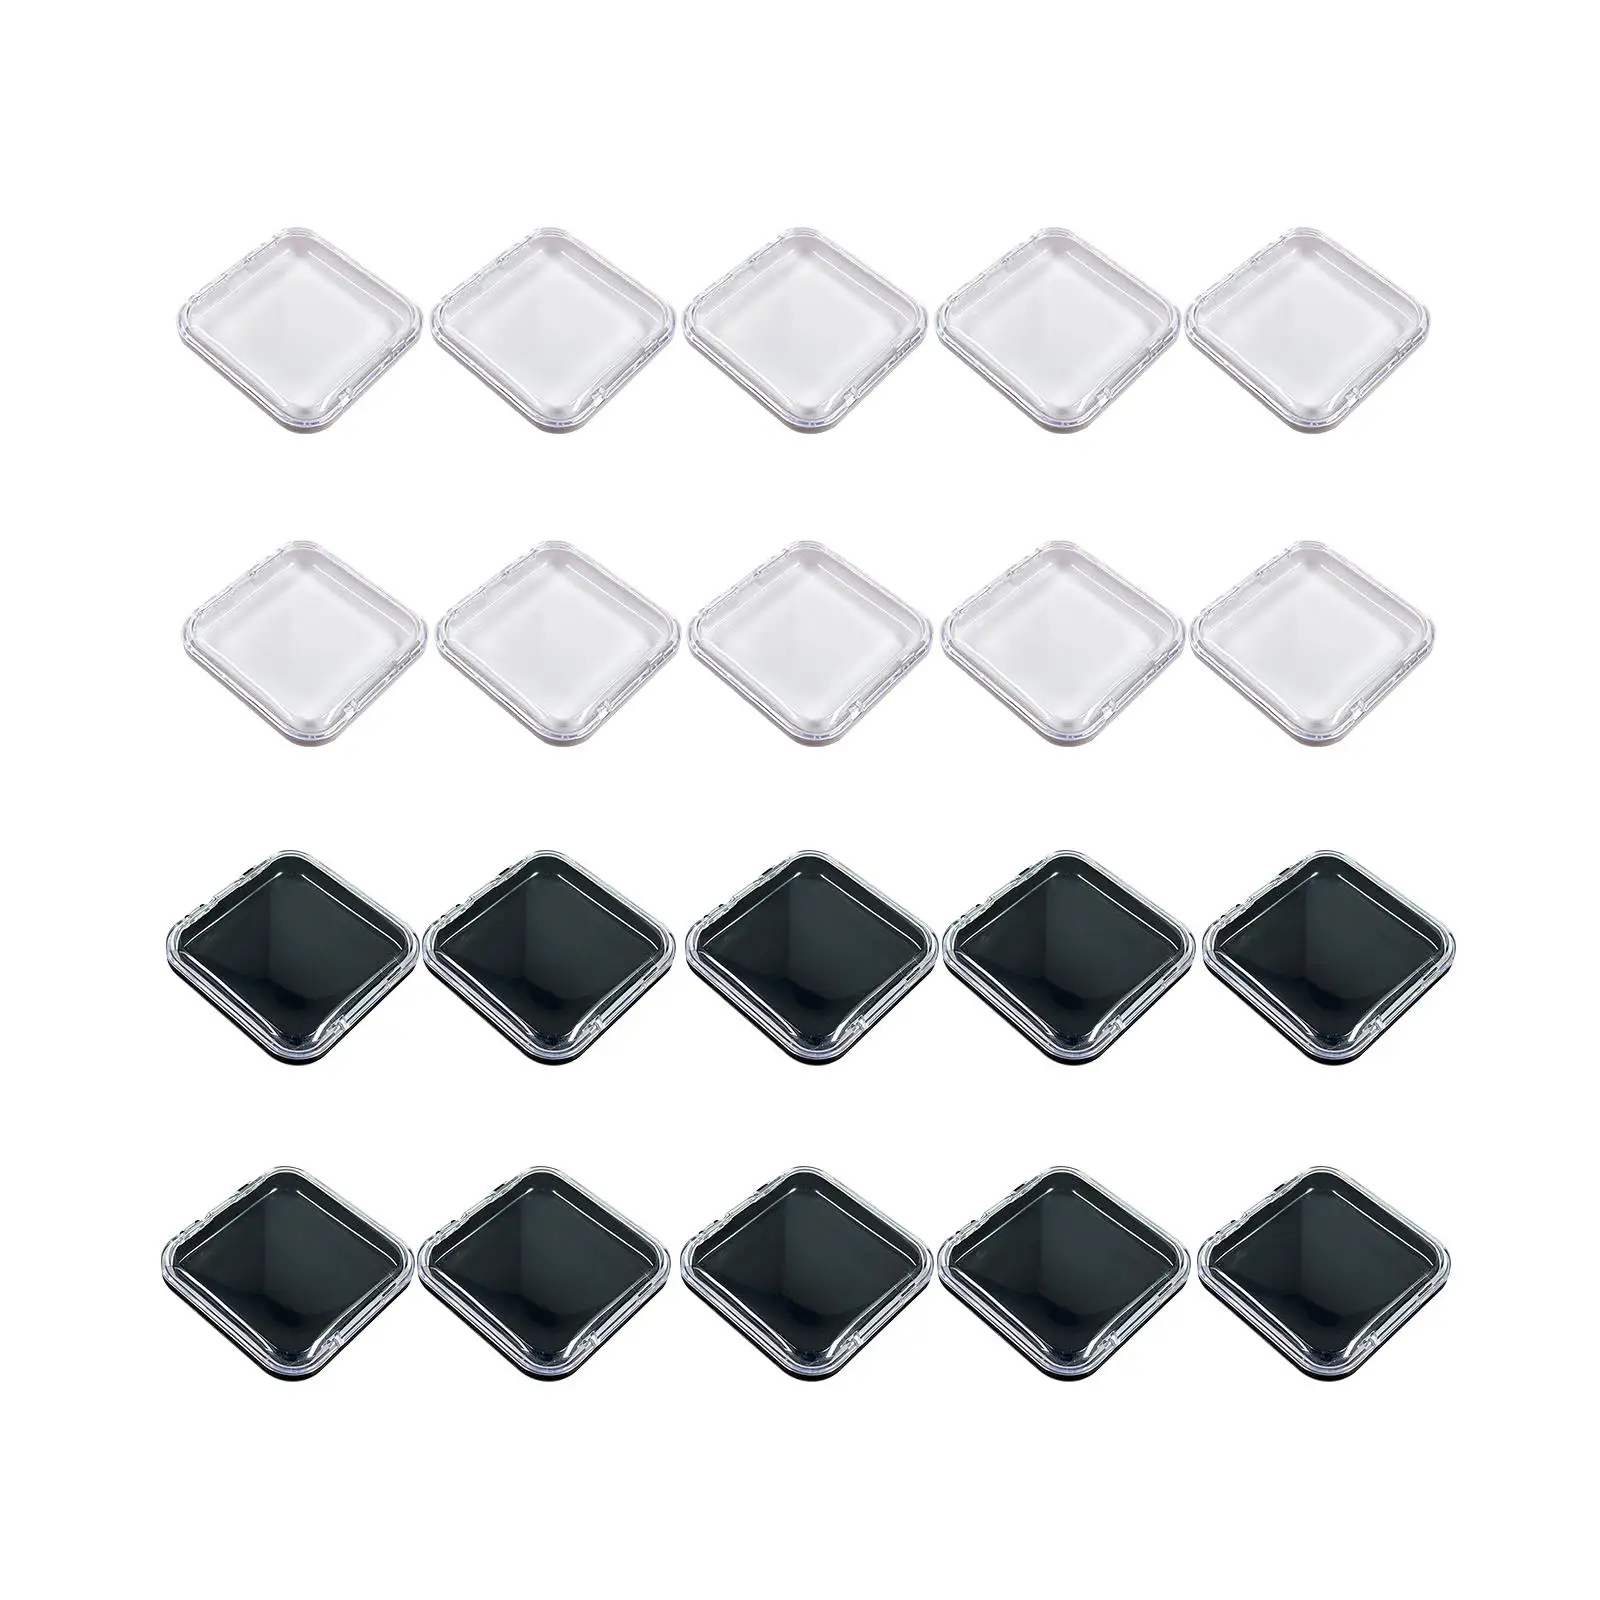 10 Pieces Press on Nail Storage Box Nail Packing Box for Home Use